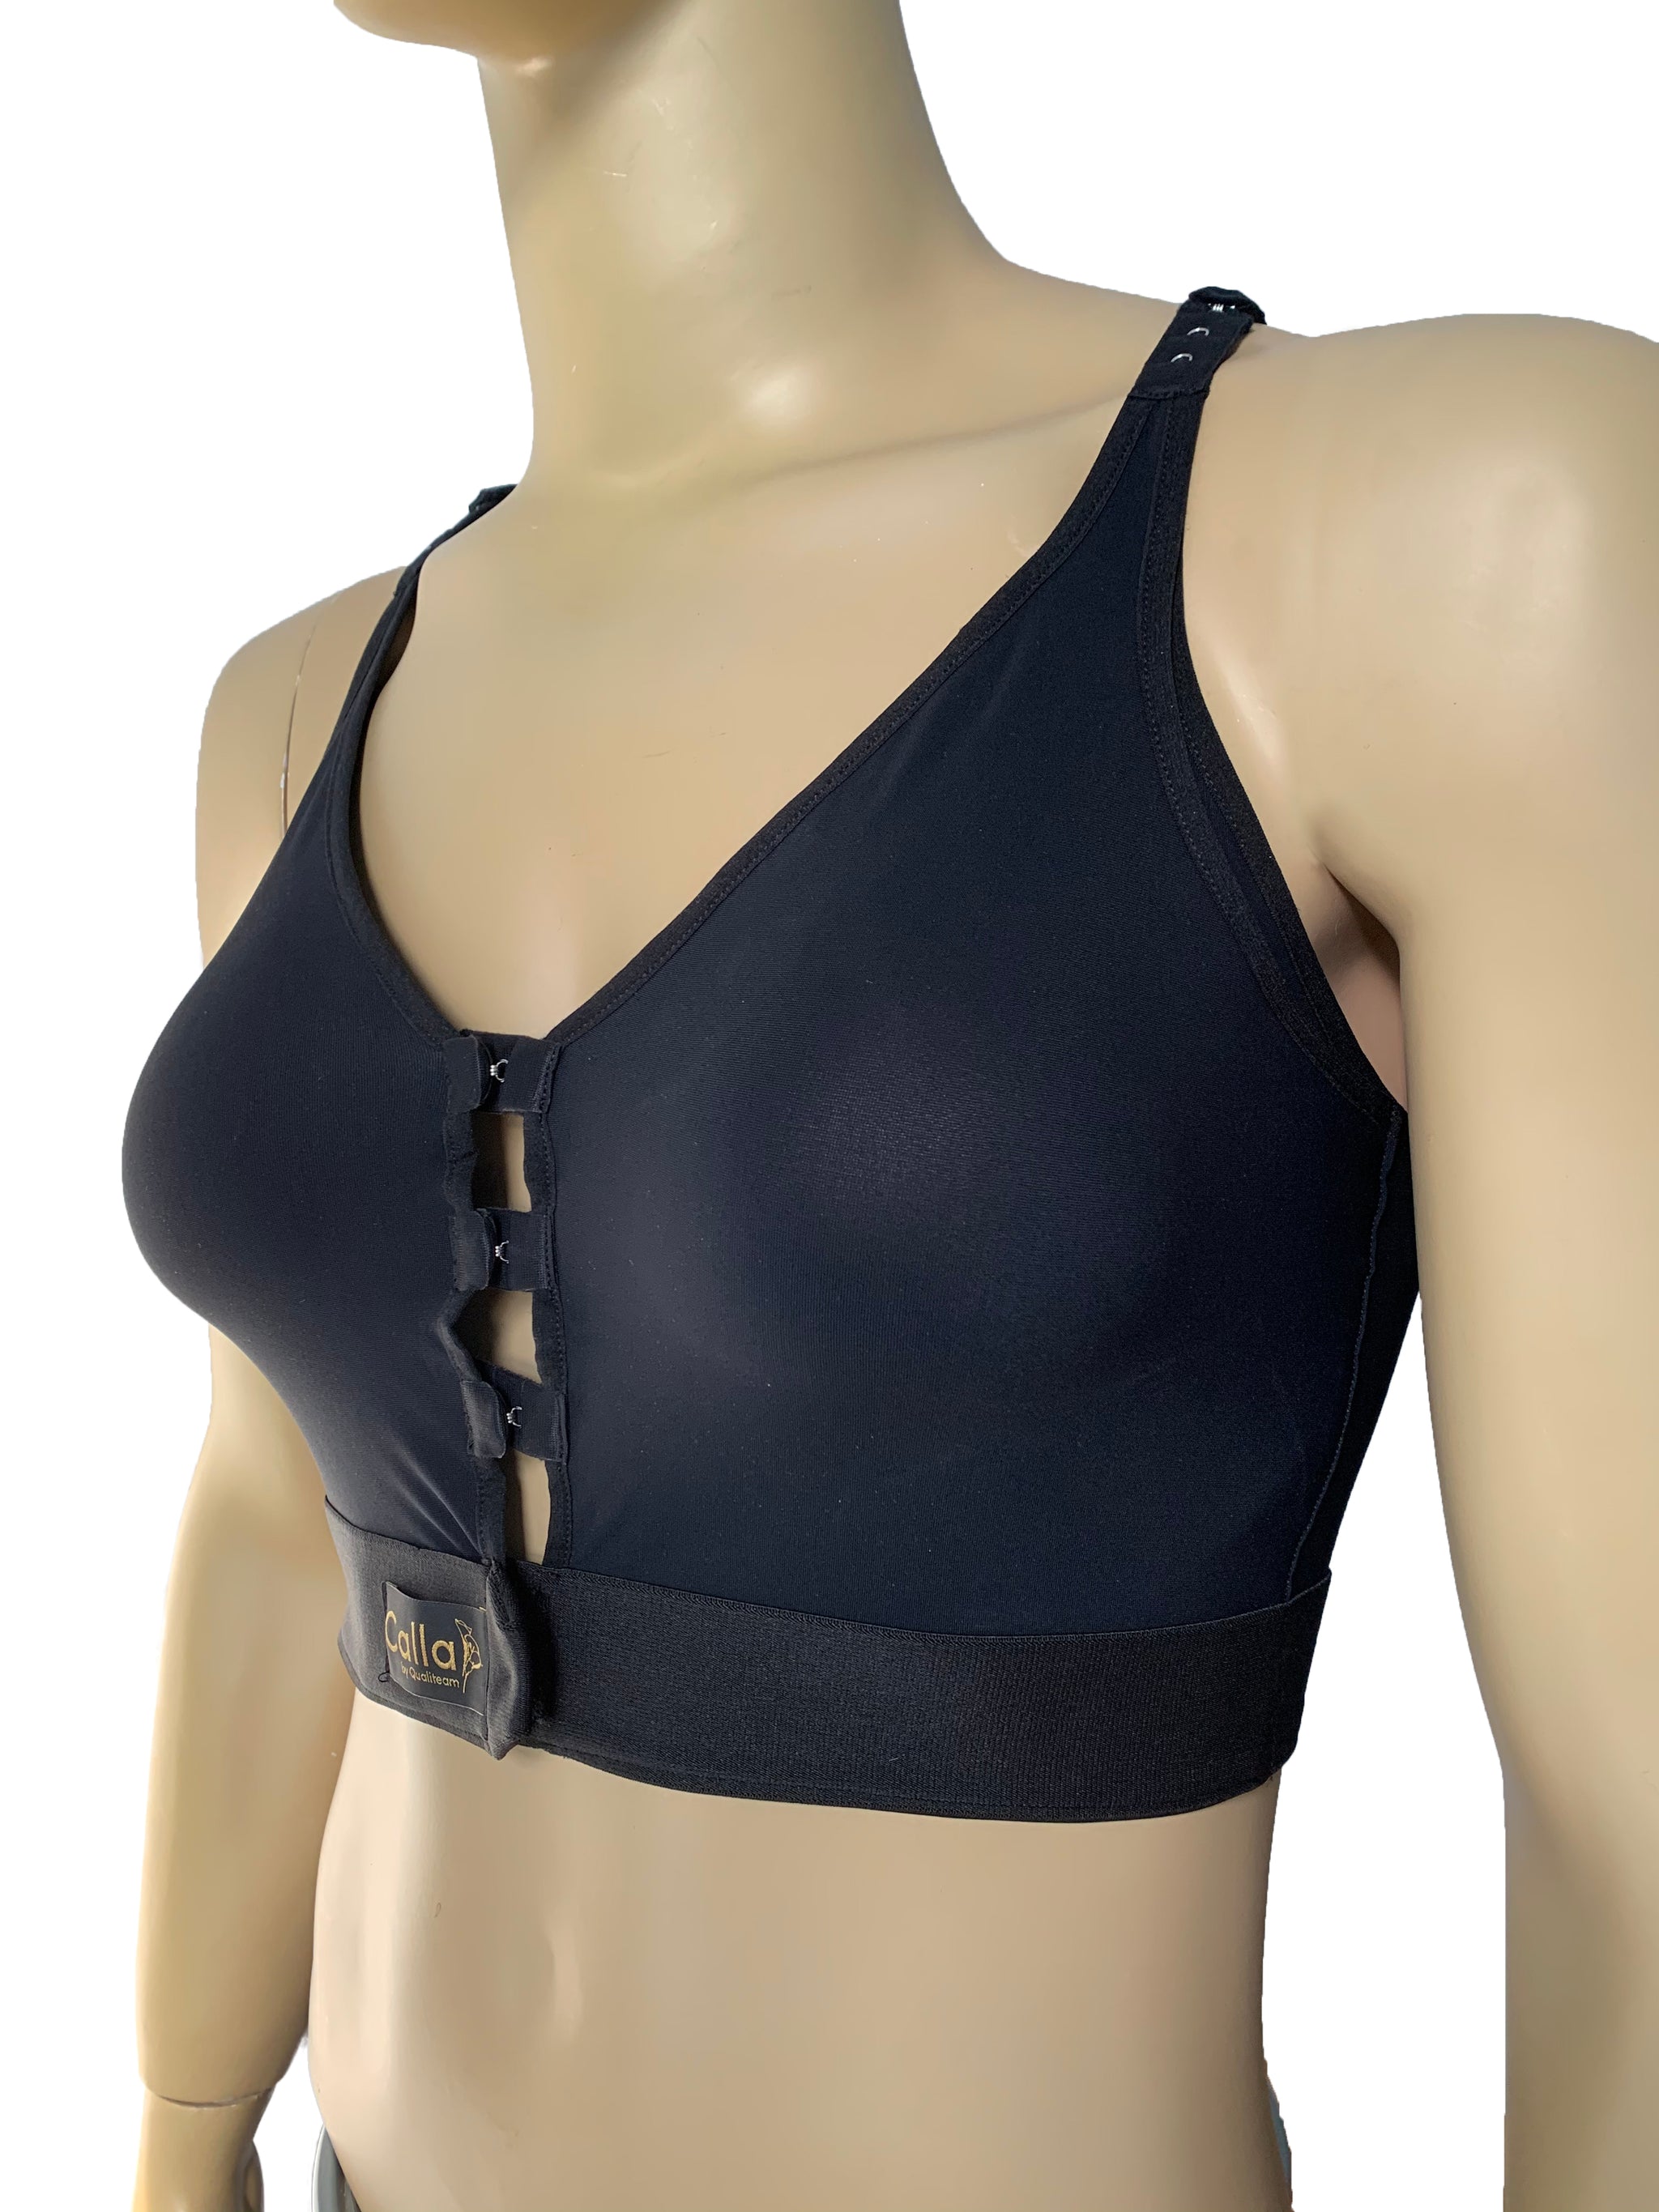 Calla Cozy Post Surgery Bra with Pockets for Prosthesis - Calla by Qualiteam